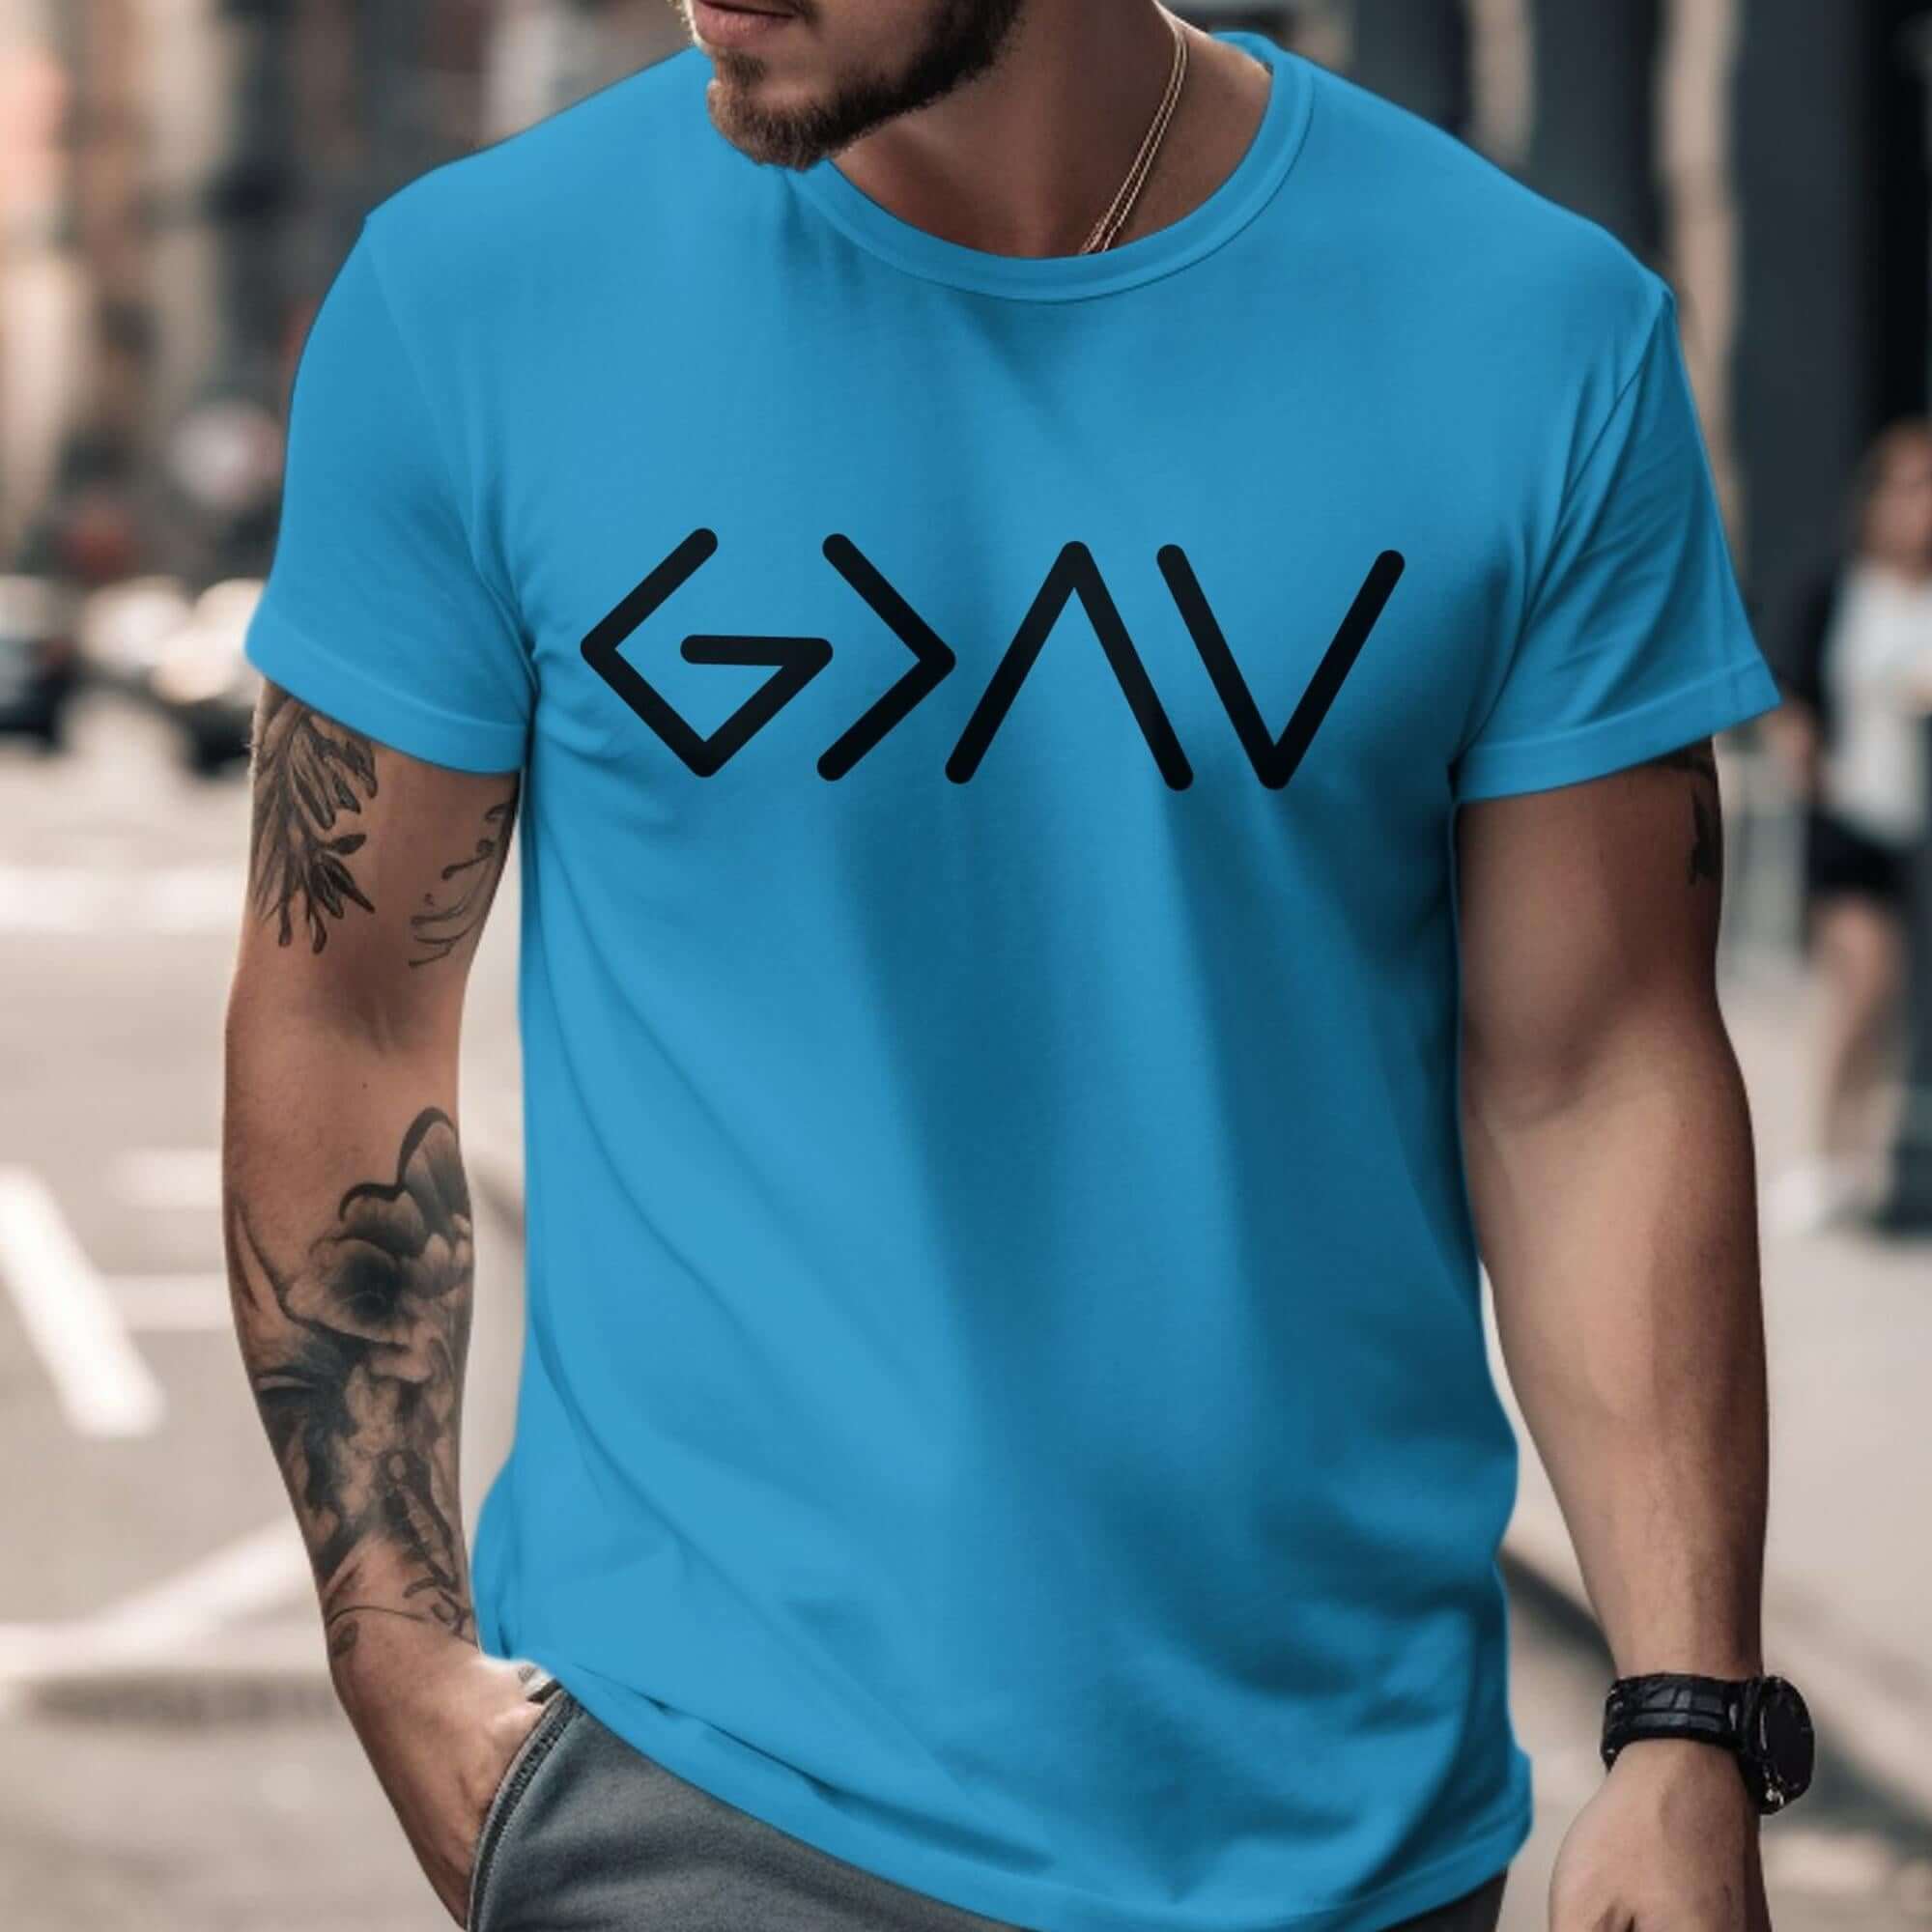 Greater Than the Highs and Lows Men's Jersey Short Sleeve Tee Size: XS Color: Aqua Jesus Passion Apparel